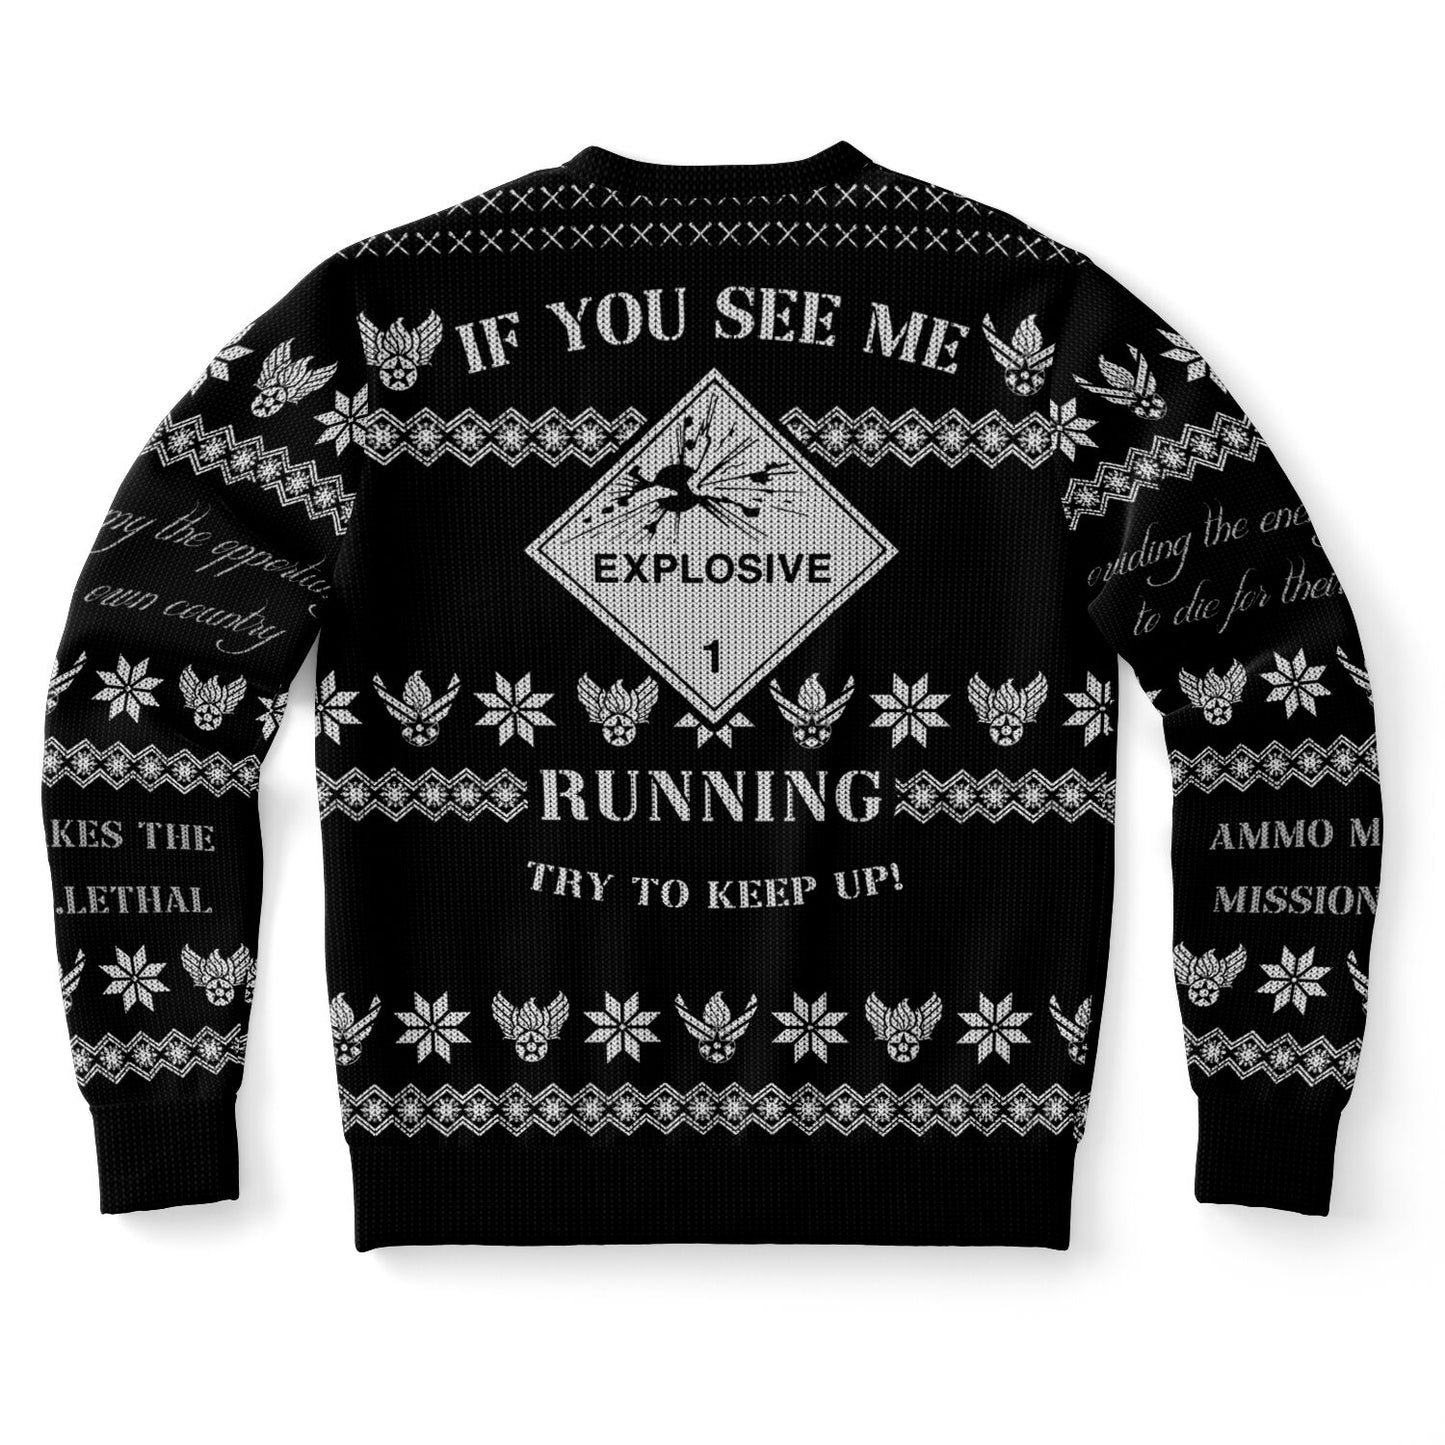 AMMO Makes The Mission Lethal Christmas Party Pisspot Placard Black and White Sweatshirt